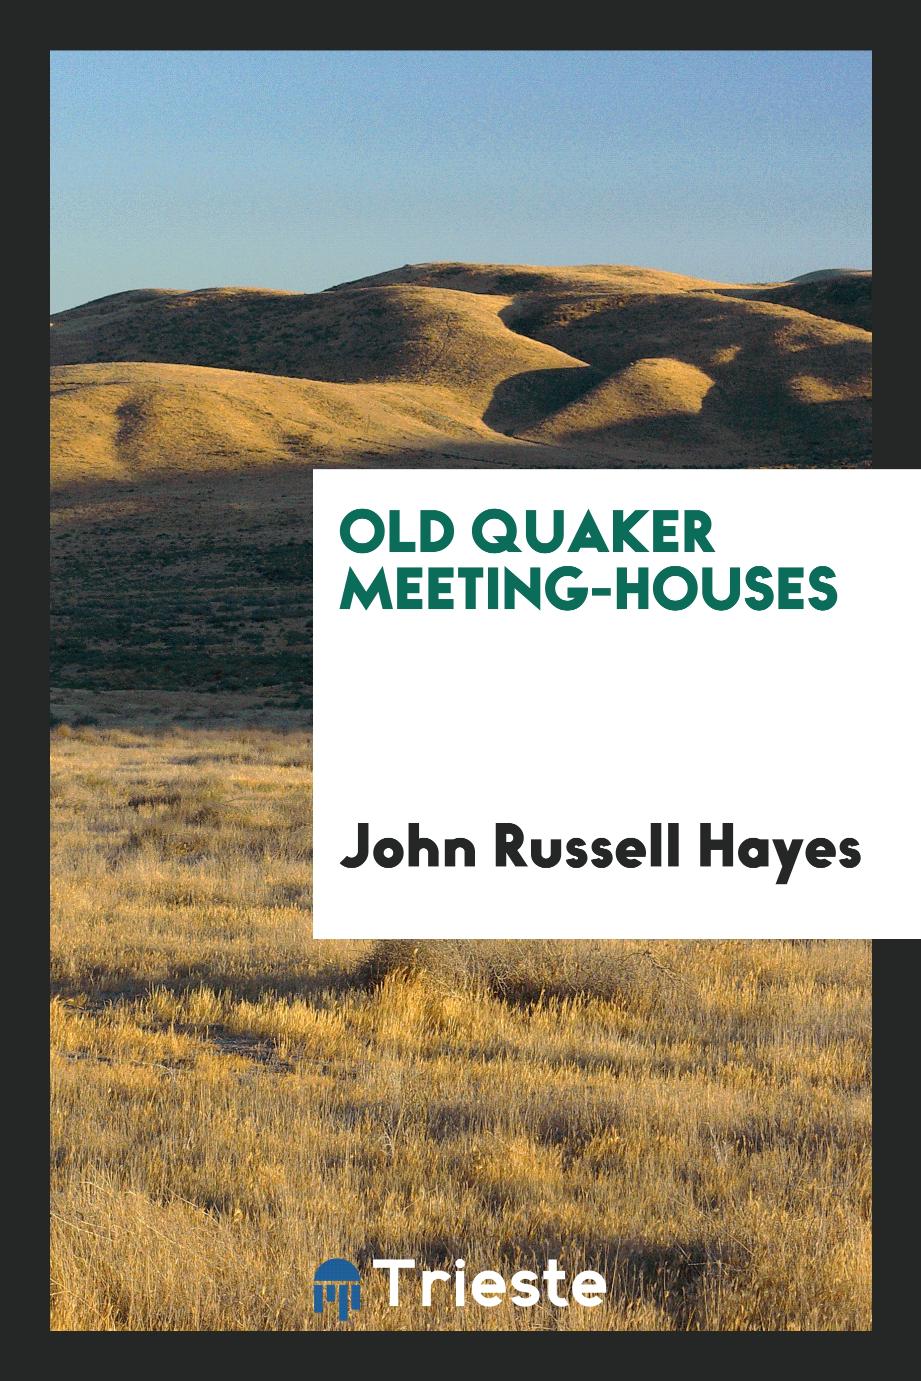 Old Quaker meeting-houses